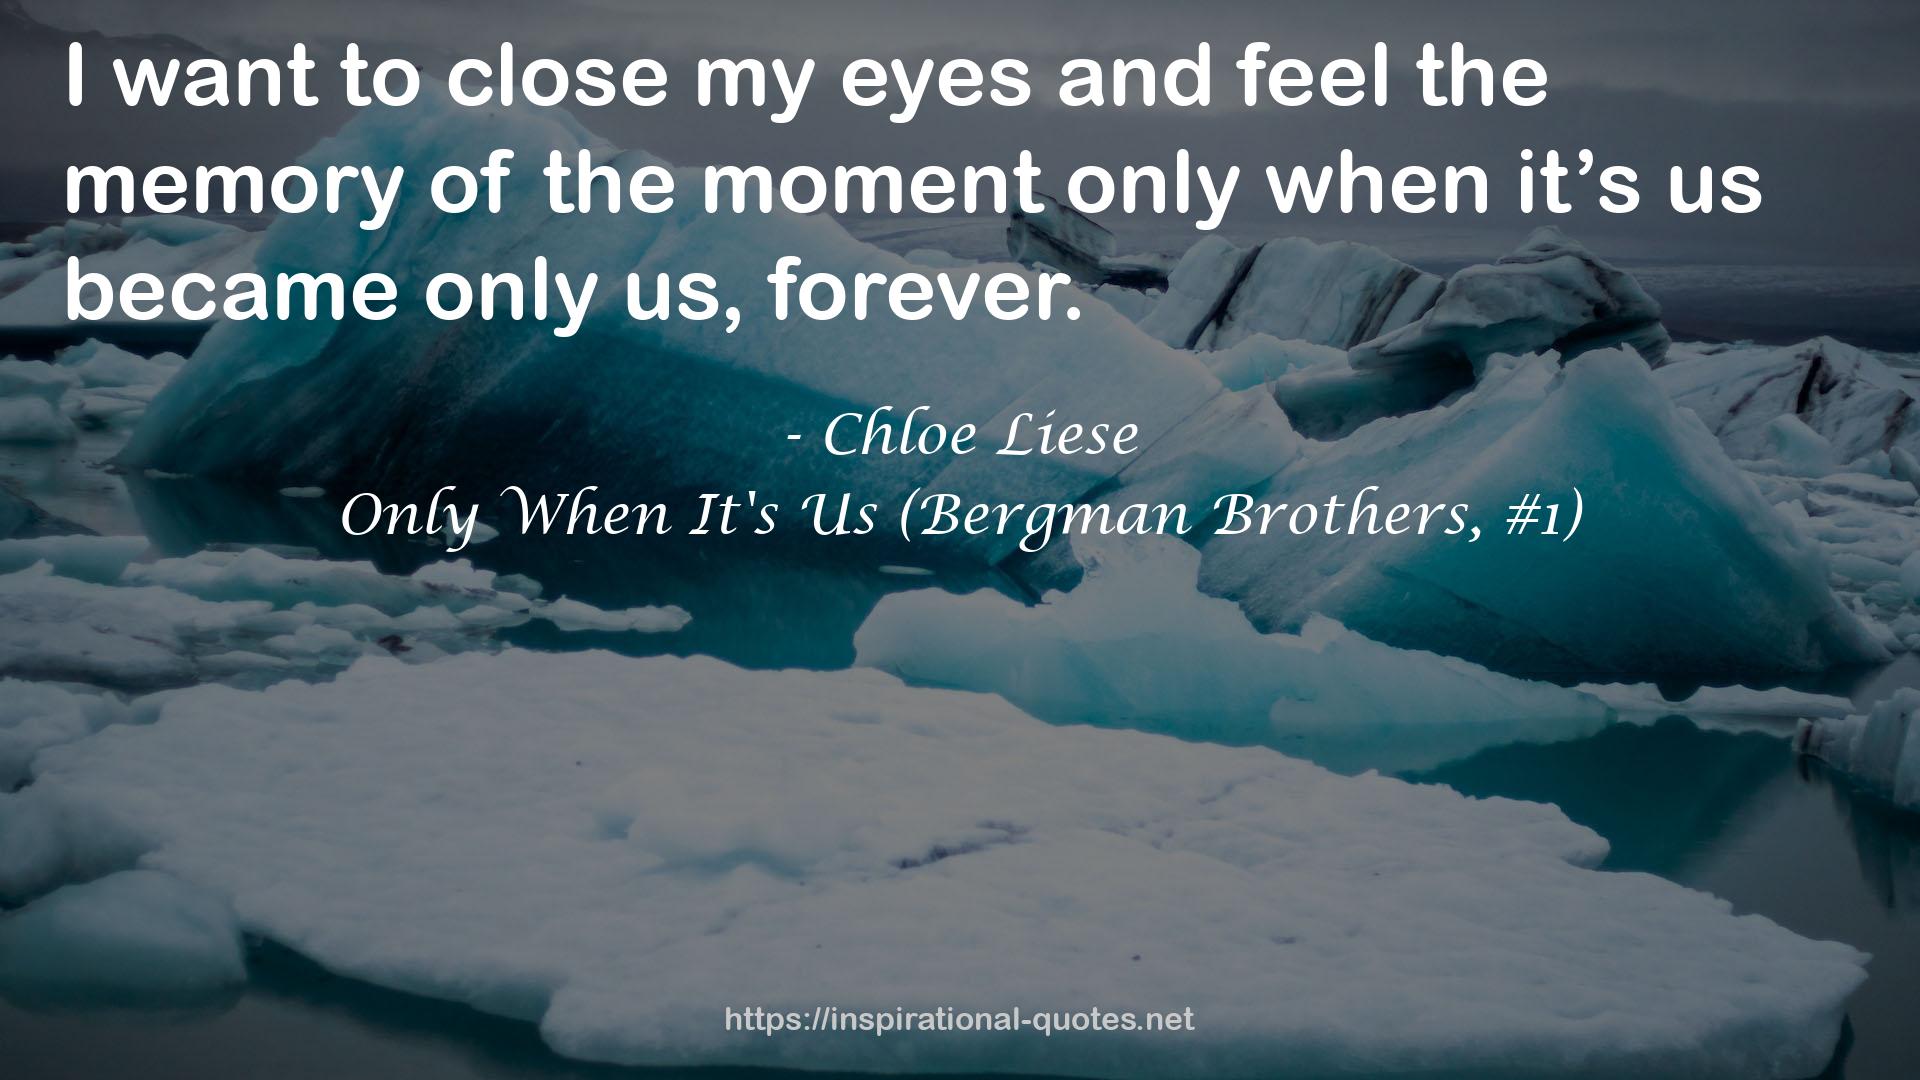 Chloe Liese QUOTES